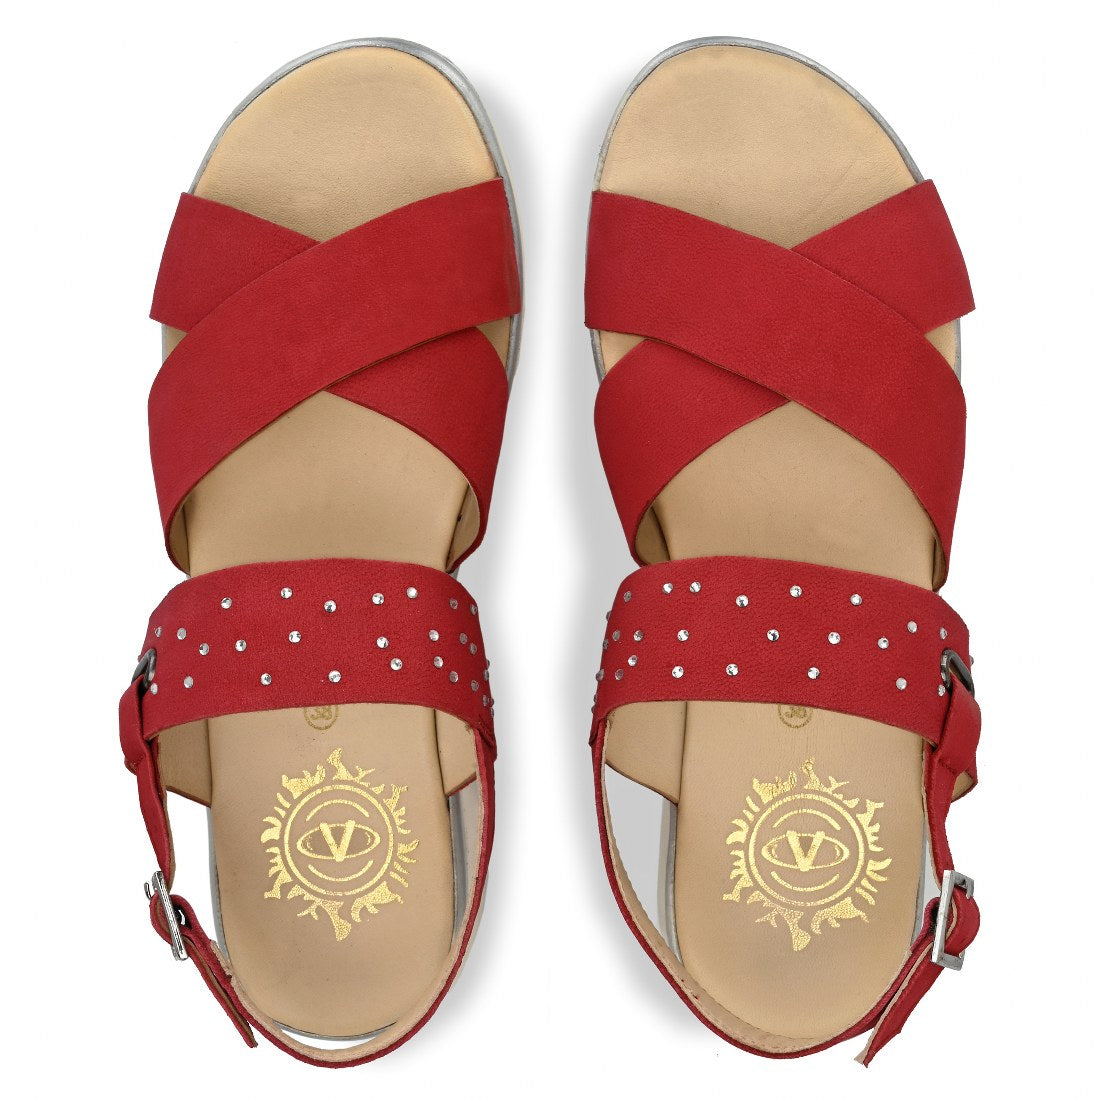 W-HR-TEMPE-55 WOMEN LEATHER RED CASUAL SANDAL OPEN